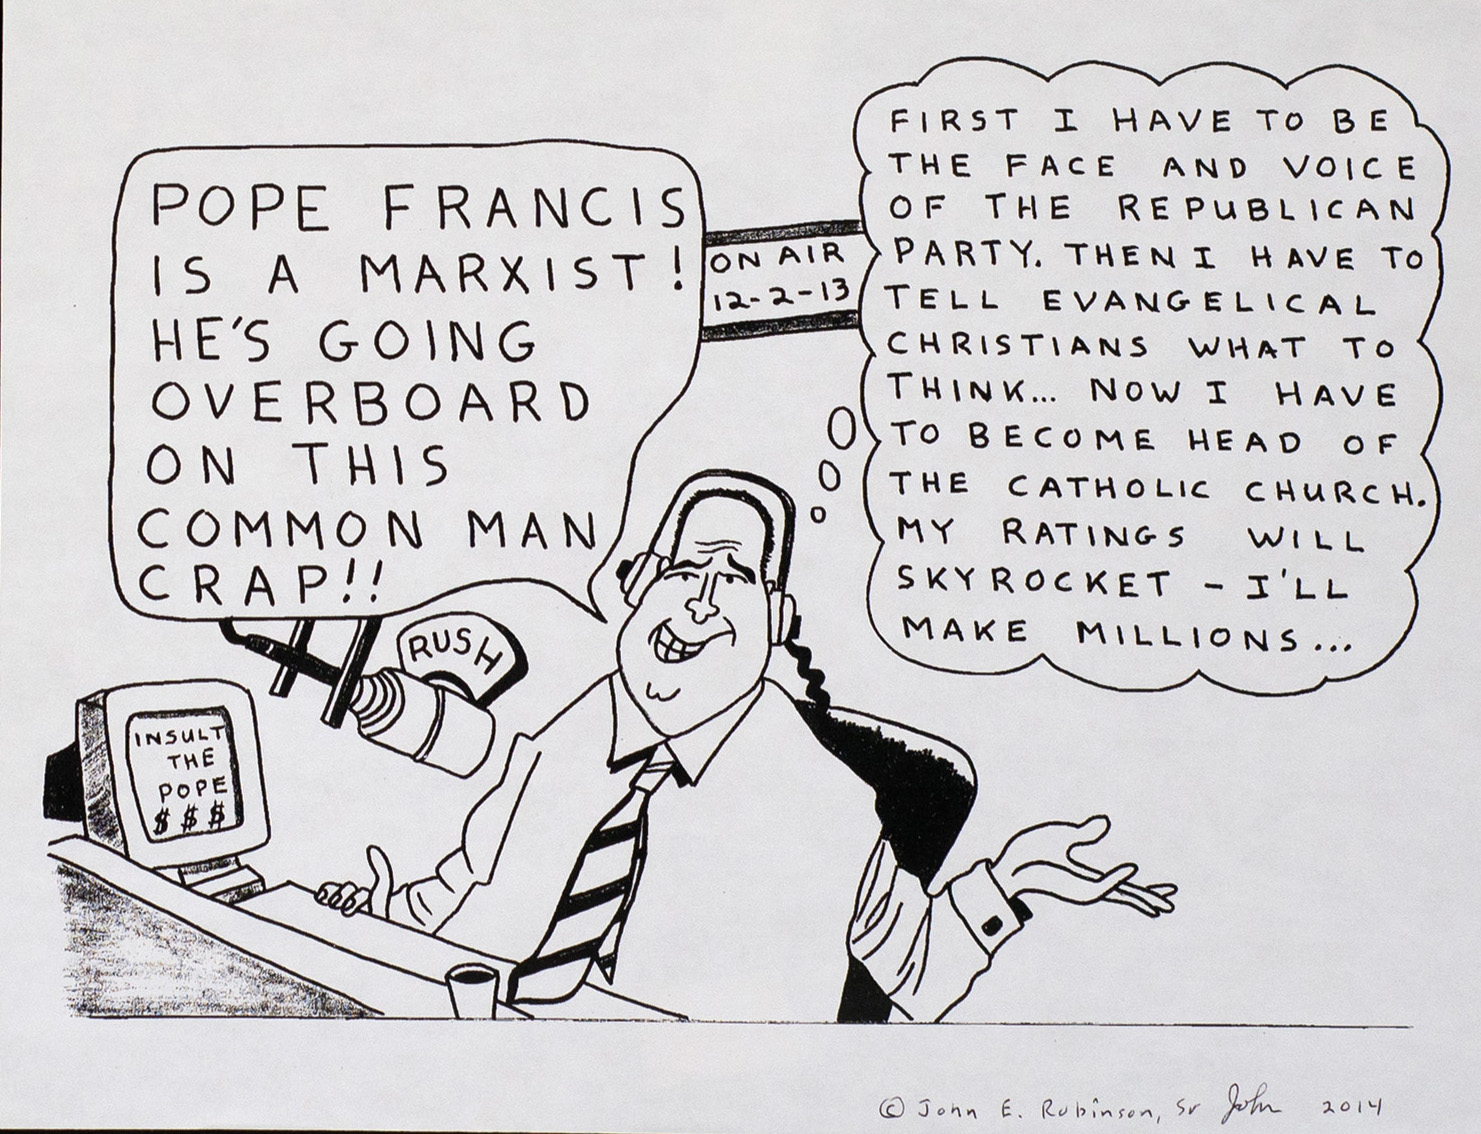 Pope Francis is a Marxist